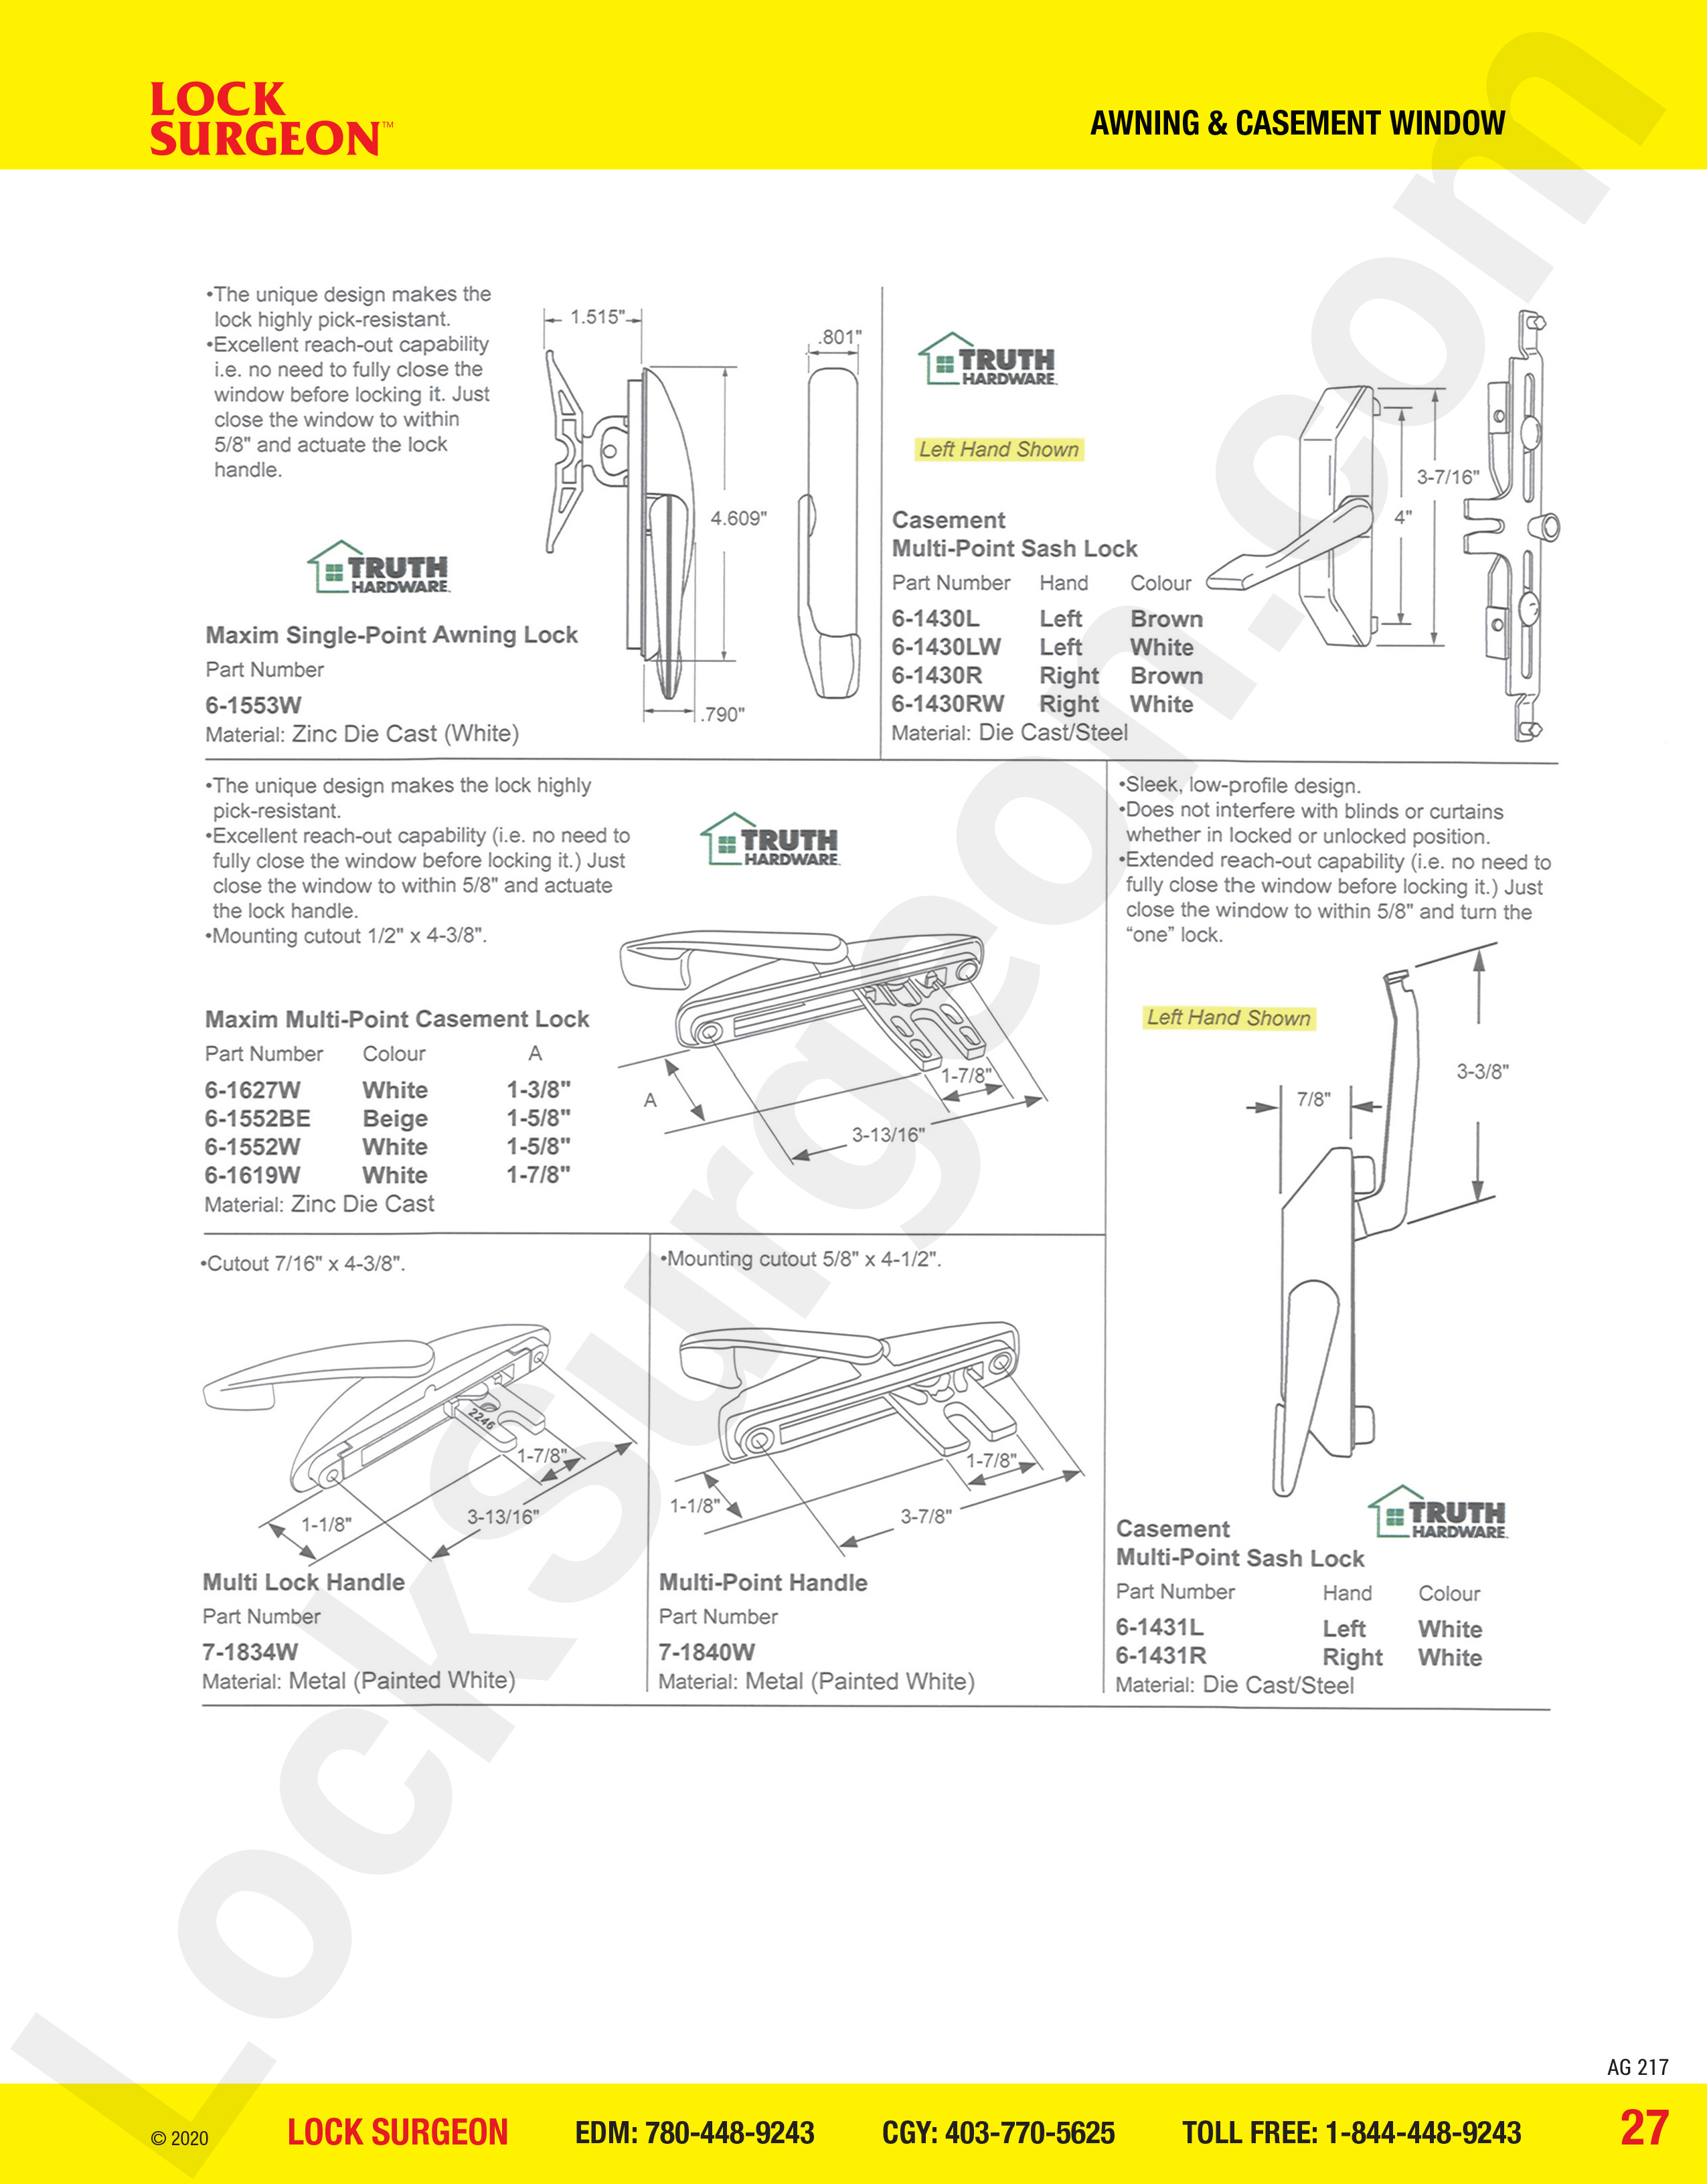 awning and casement window parts for locks